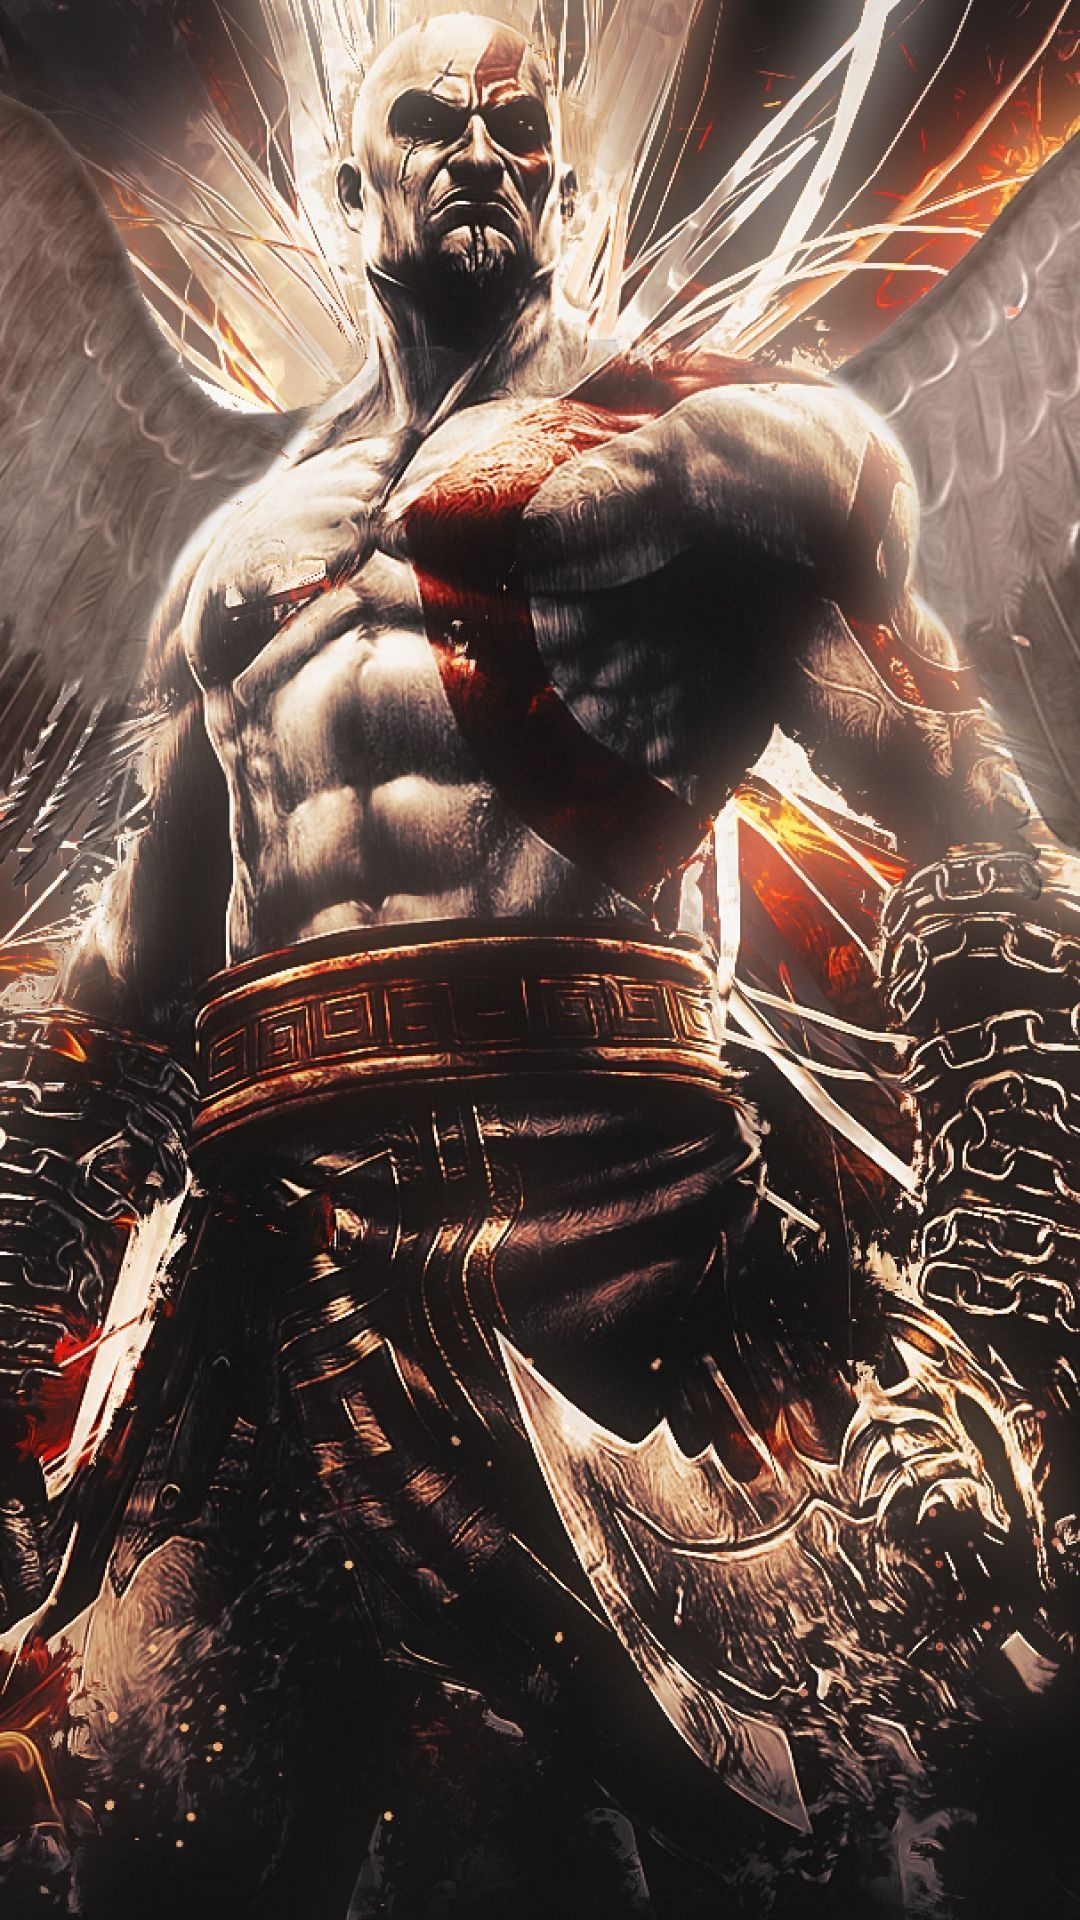 God of War iPhone wallpapers, 4K gaming backgrounds, Epic game visuals, Mobile customization, 1080x1920 Full HD Phone